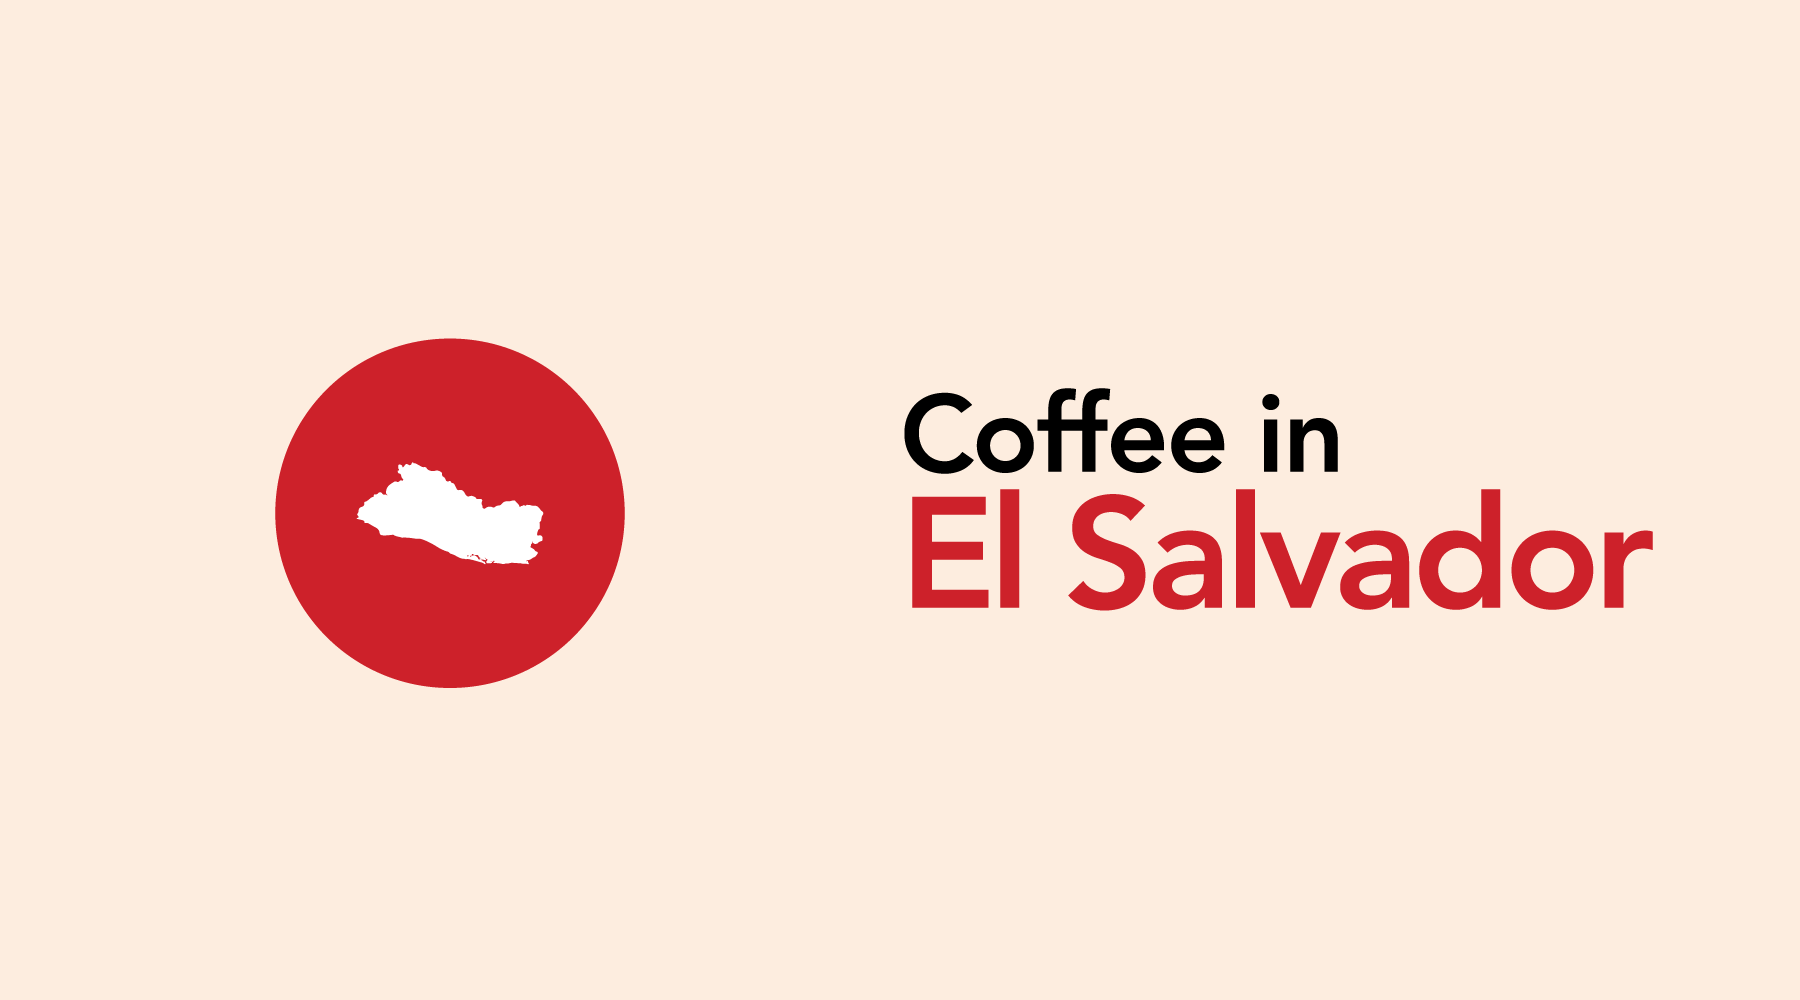 El Salvador | Where Economic Success is Fueled By Coffee